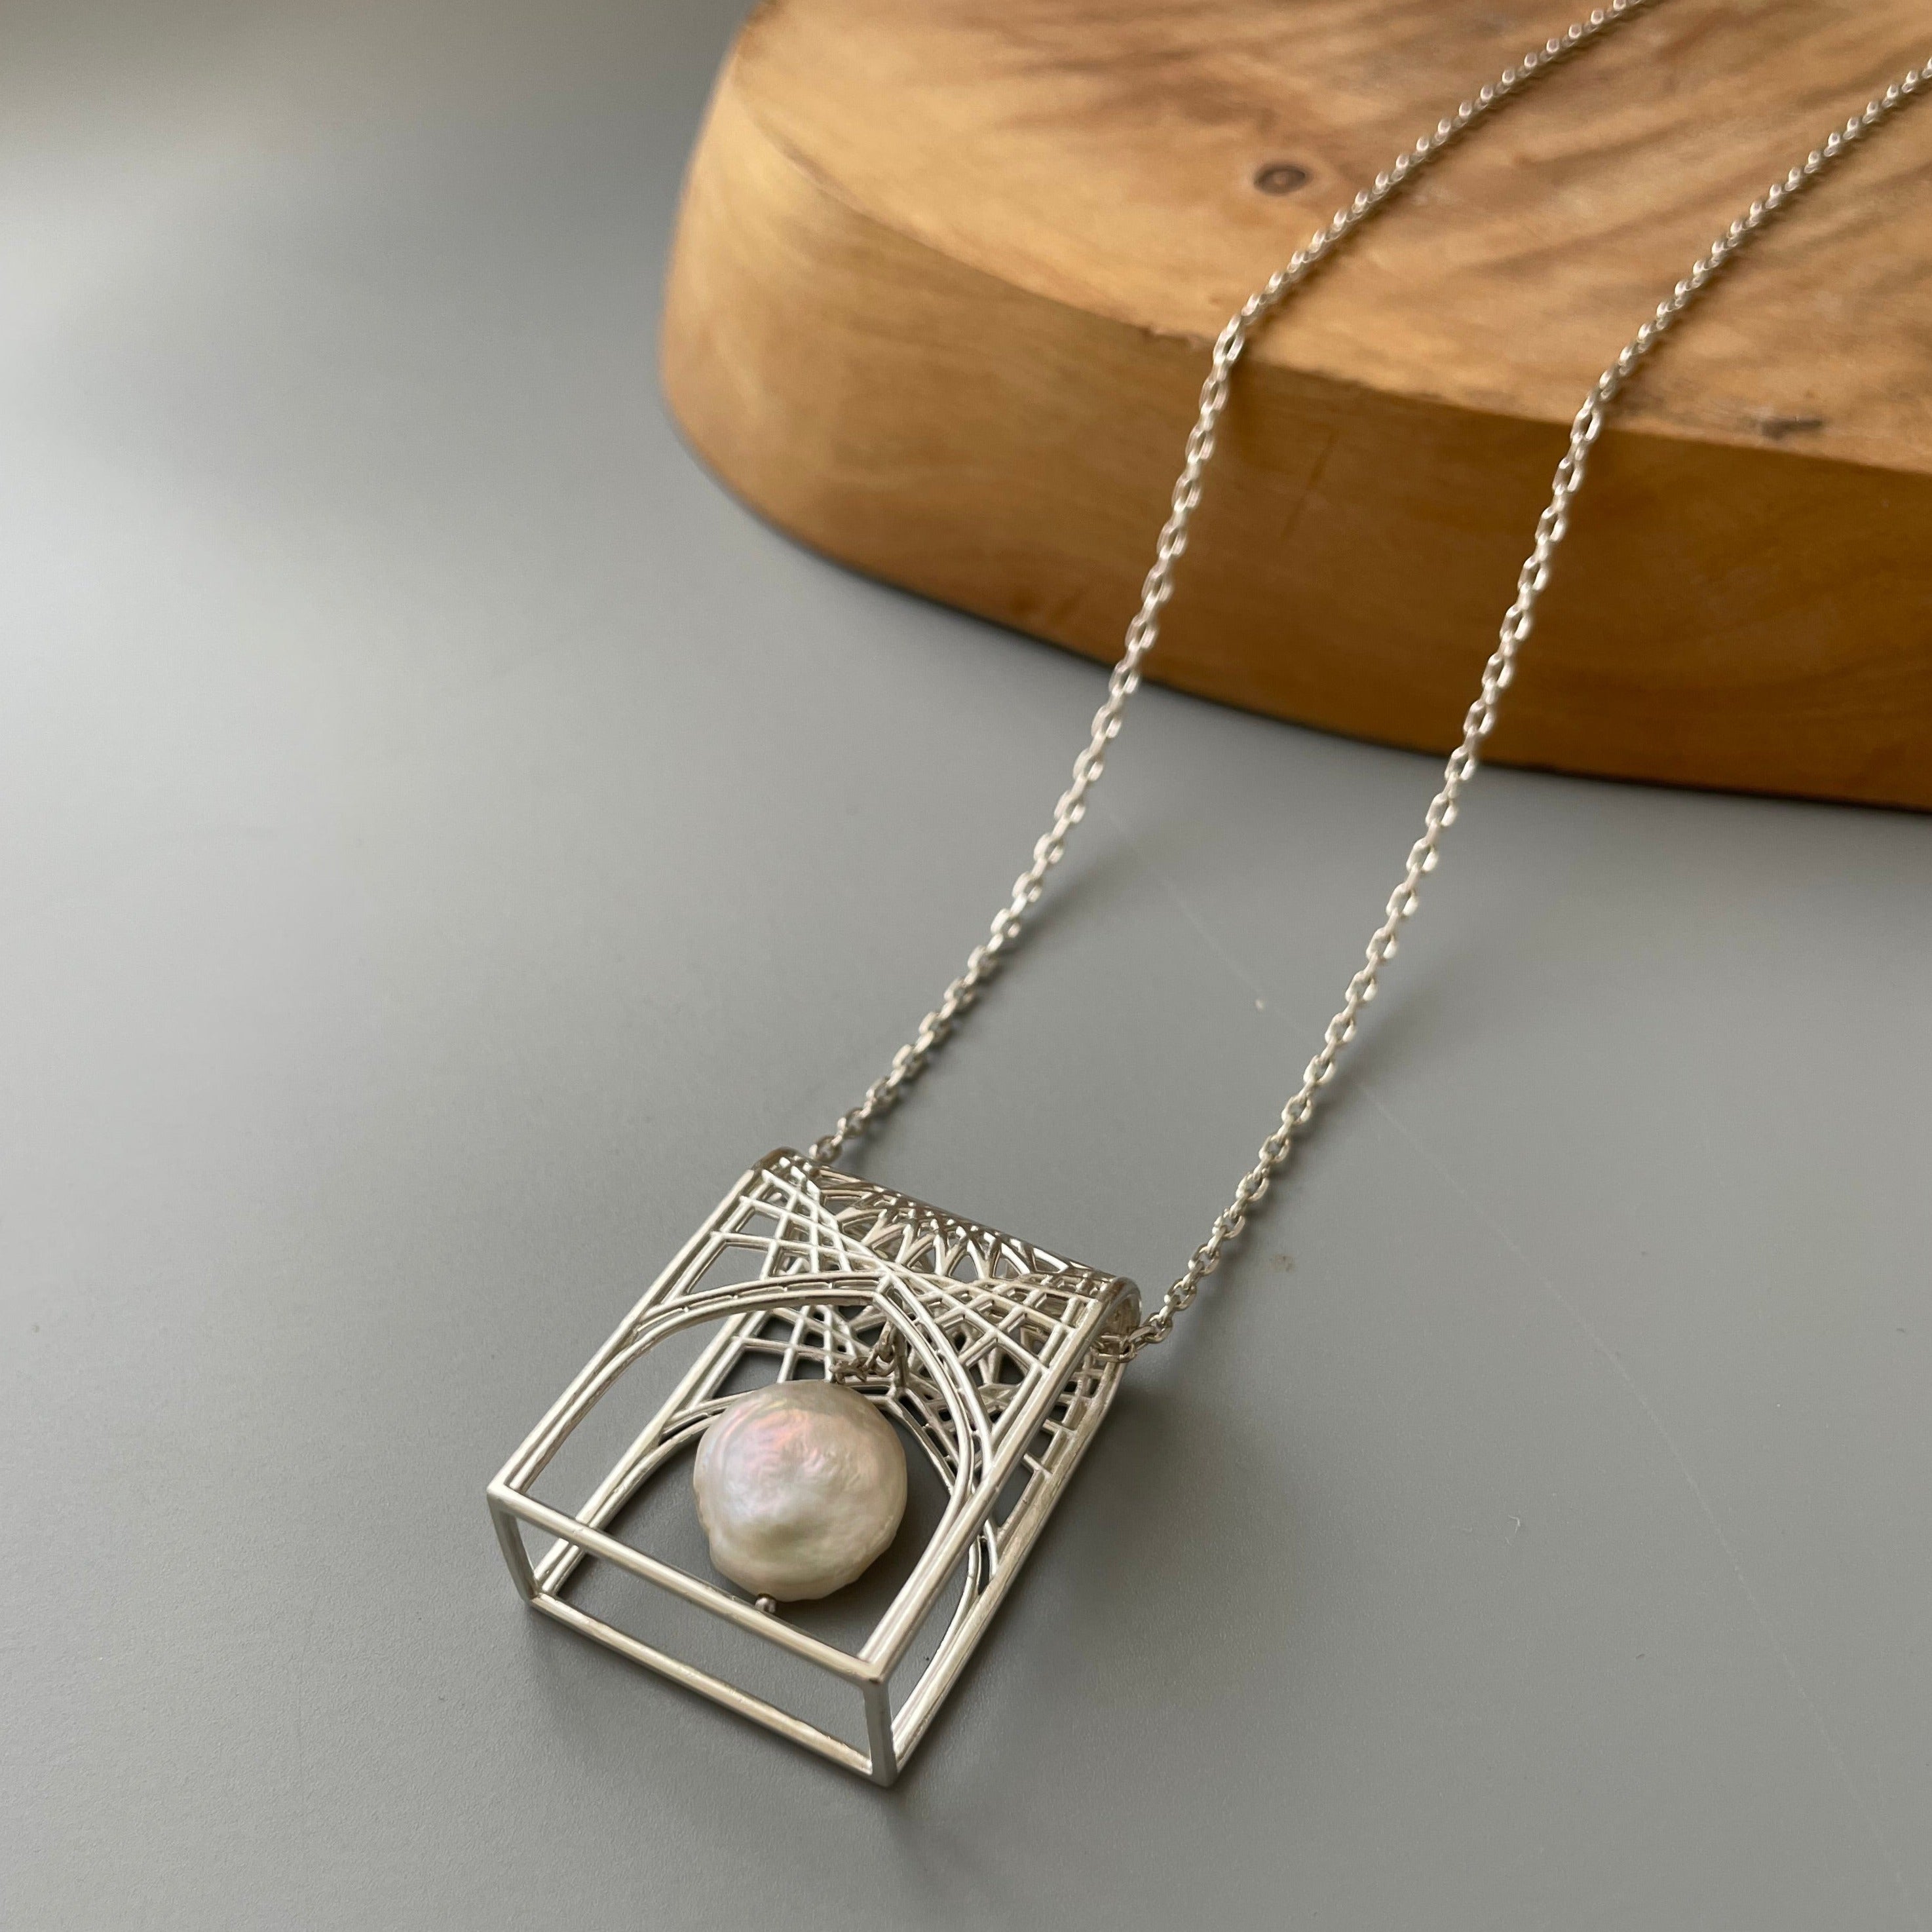 Yazd Doulat Abad Garden Silver Necklace